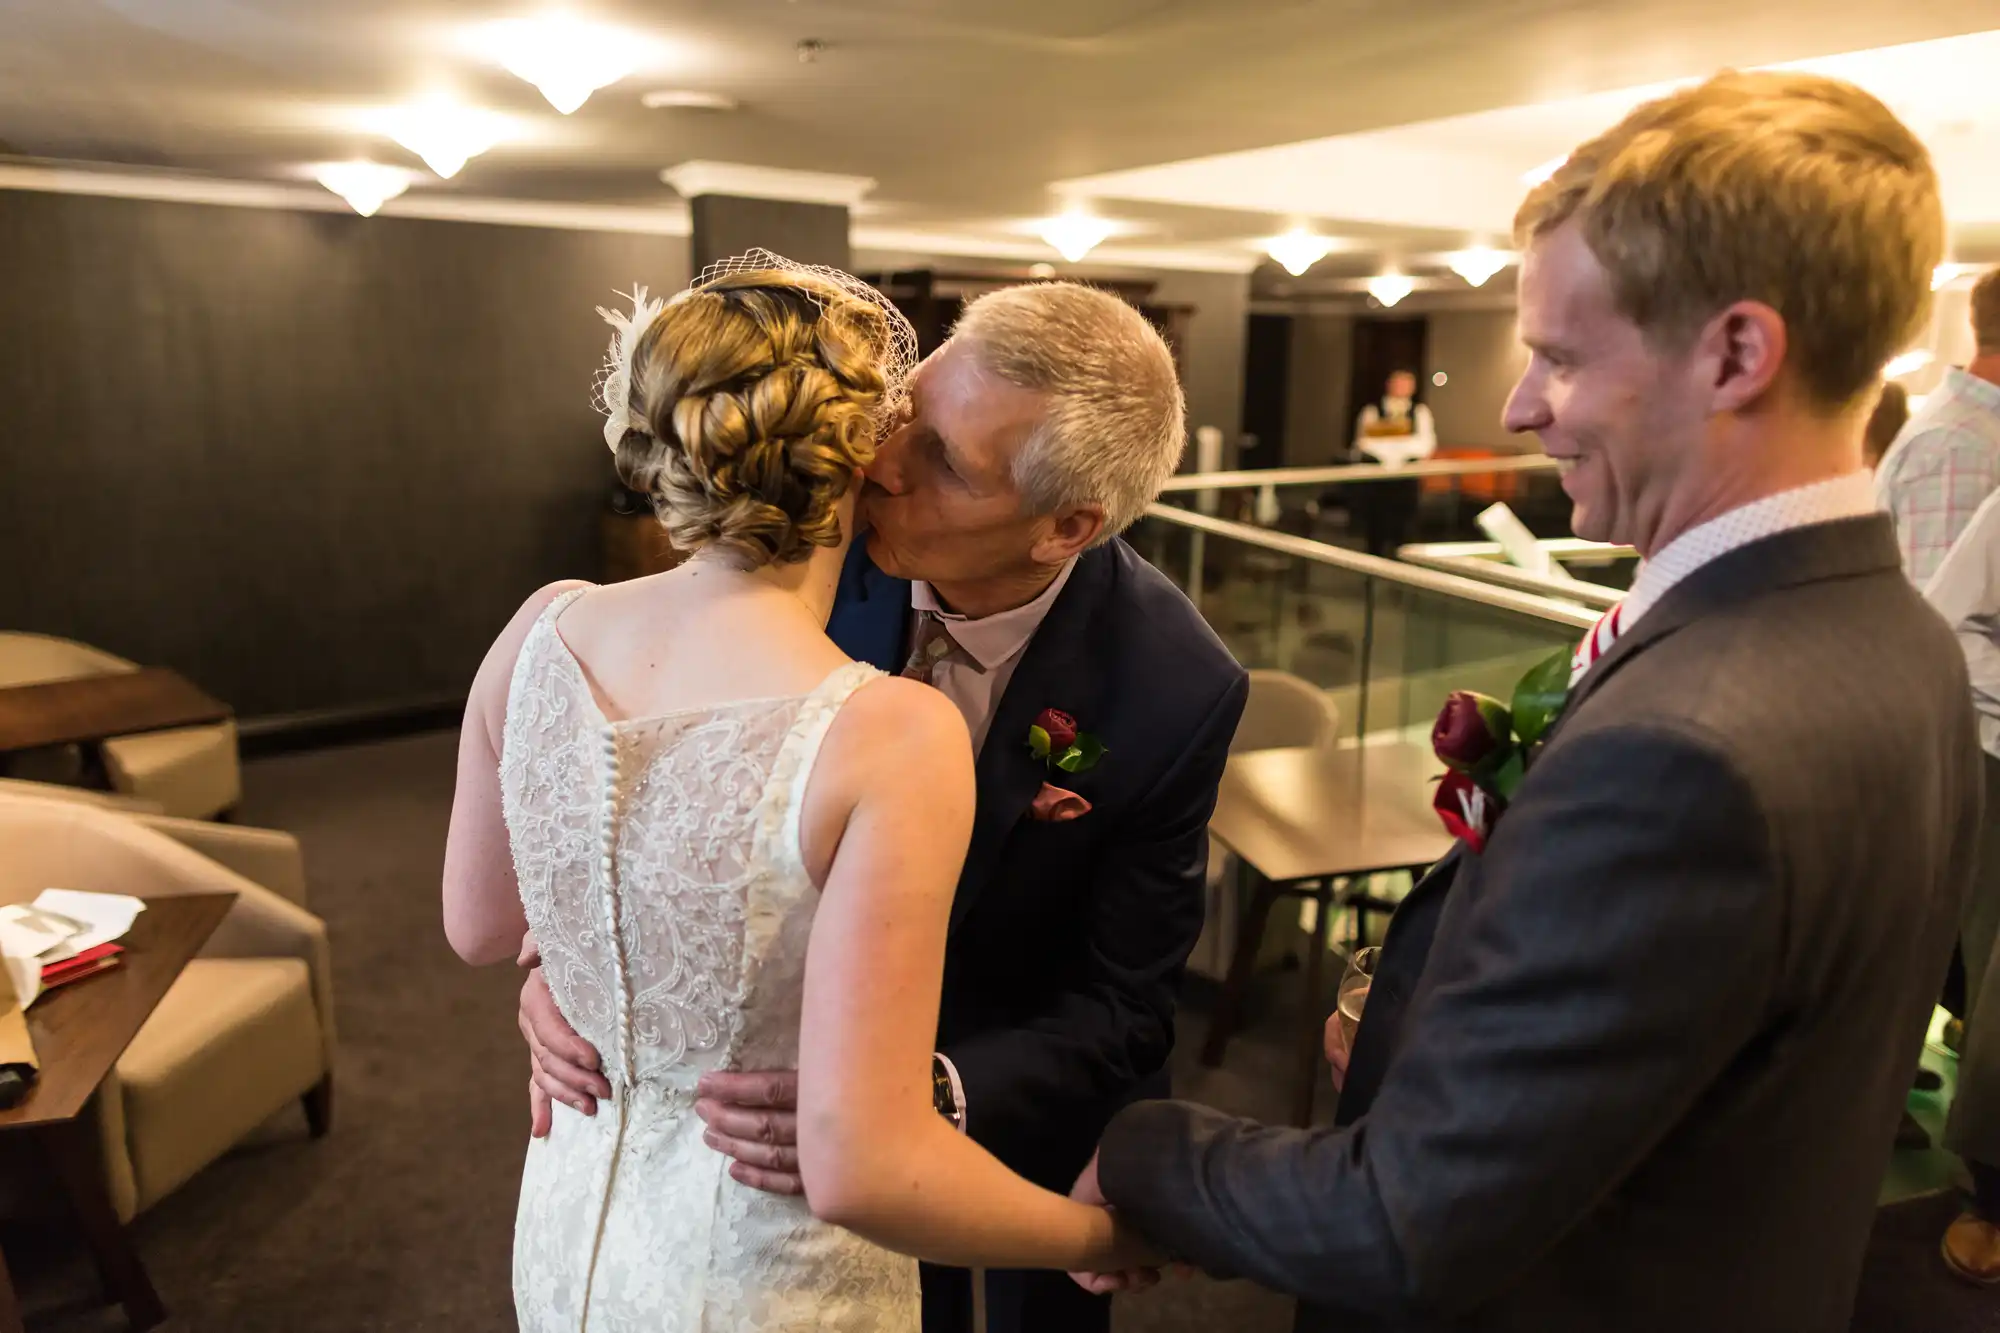 A bride in a lace gown receives a kiss on the cheek from an older man while a smiling man watches nearby at an indoor venue.